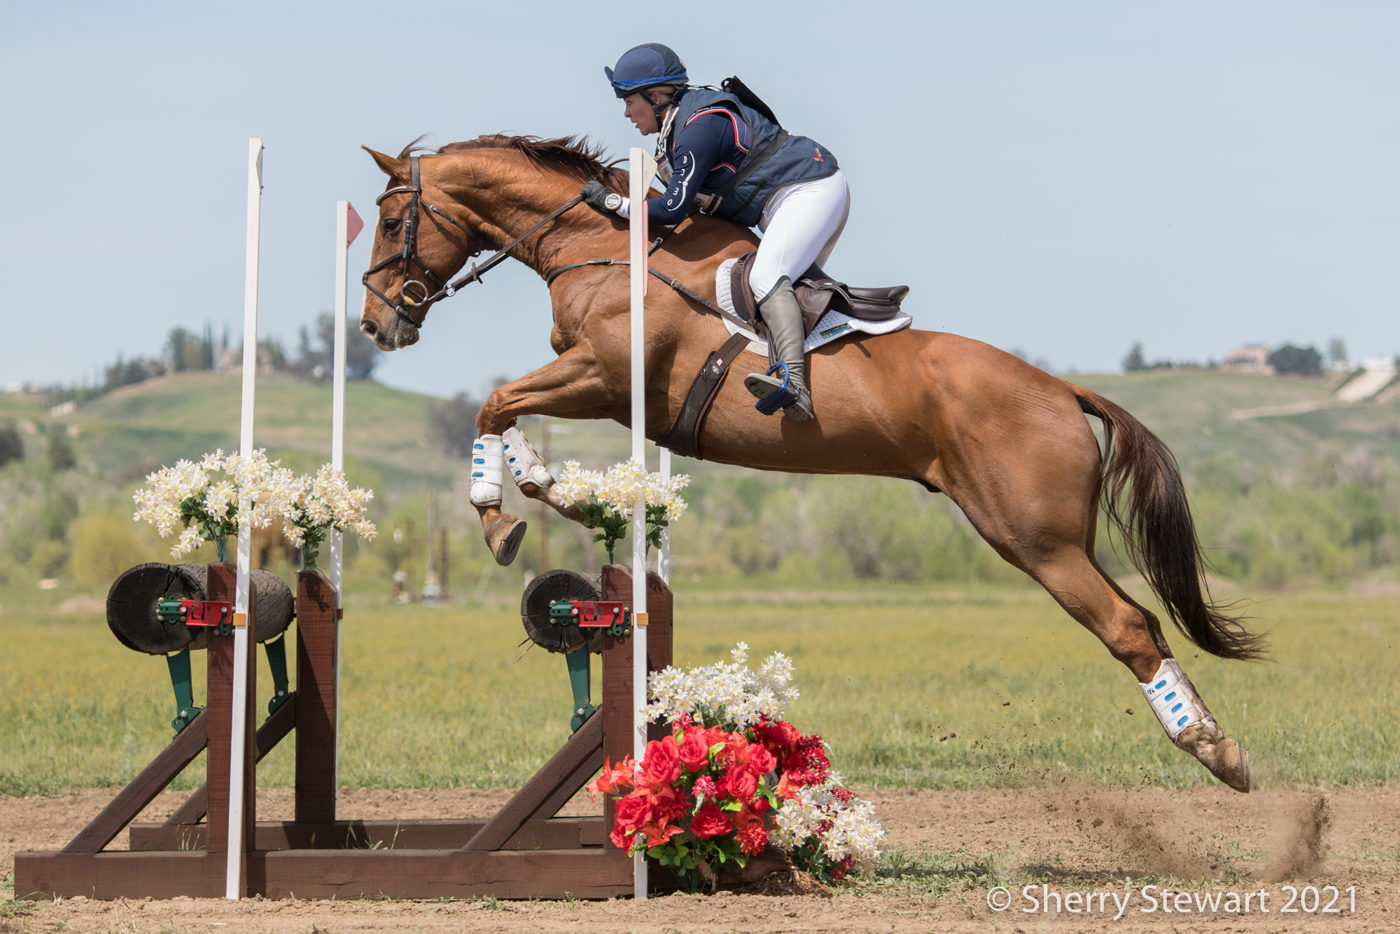 CCI3*-S - 1st - Lauren Burnell and Counterpoint. Sherry Stewart Photo.